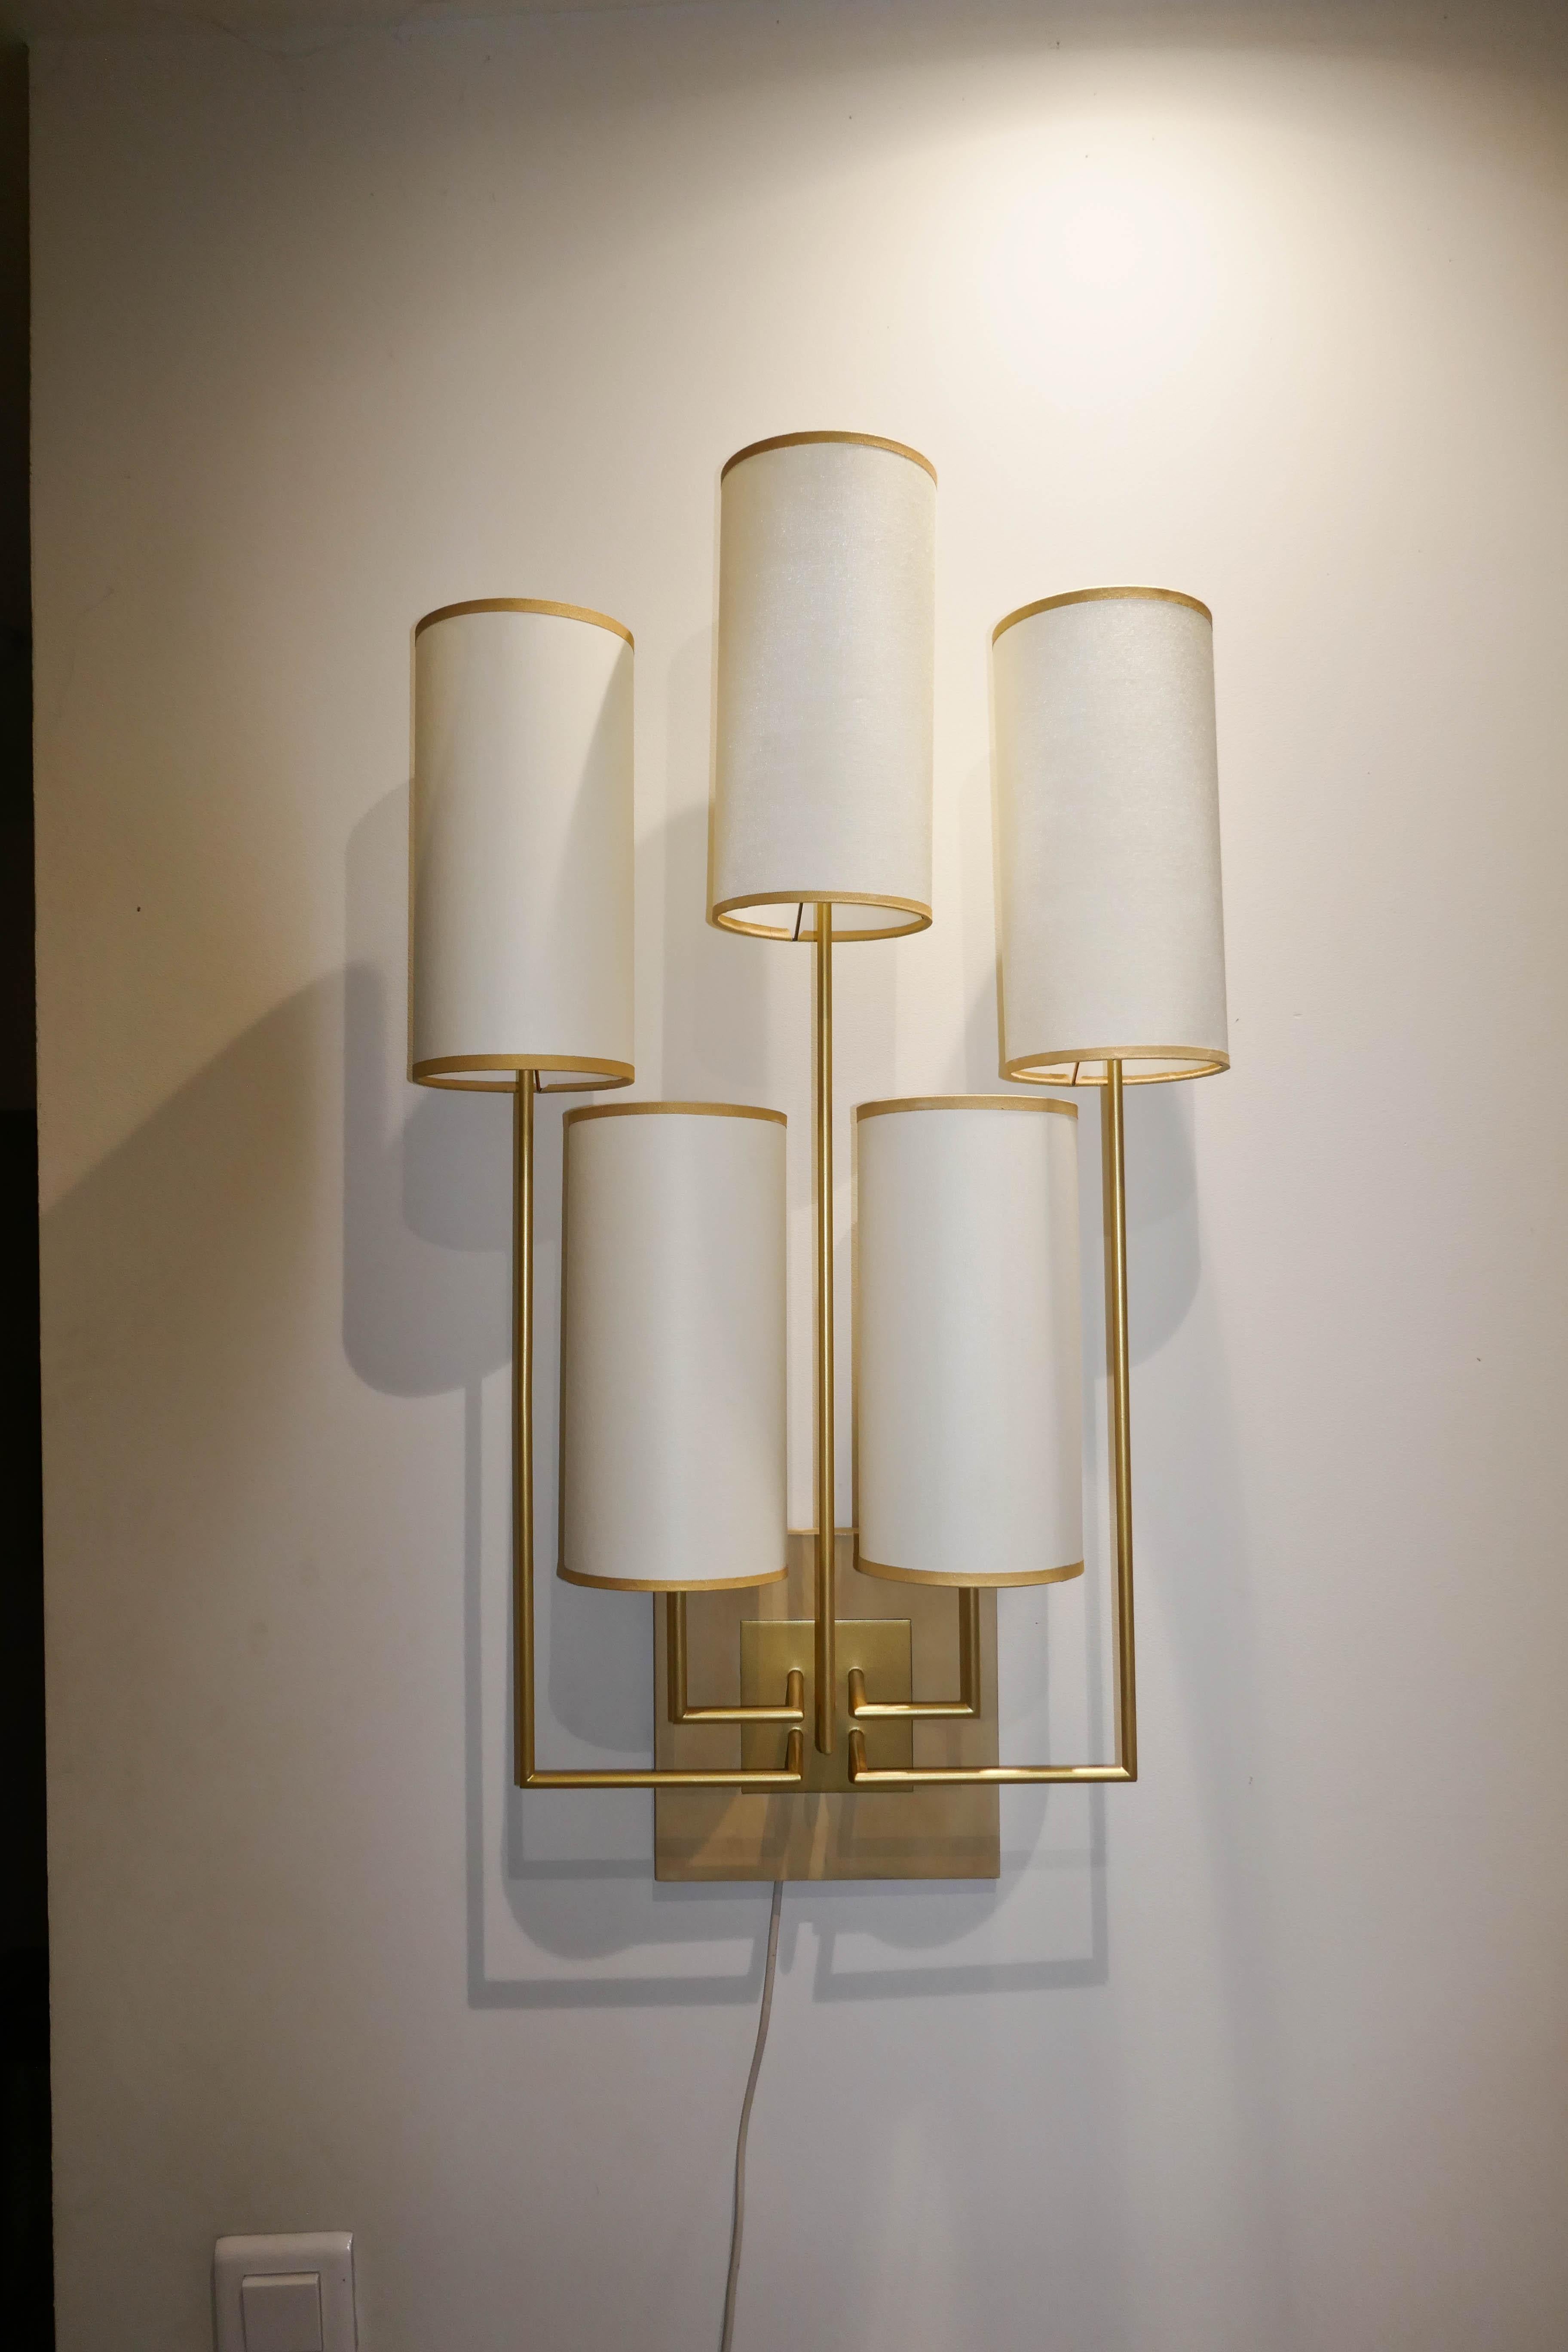 Wall light, sconce in gold patina metal, the base is in chestnut wood. There are five lampshades in white fabric.
This wall lamp is new but has been used for an exhibition.
This is for one item but can be sold as a pair.
Information about the